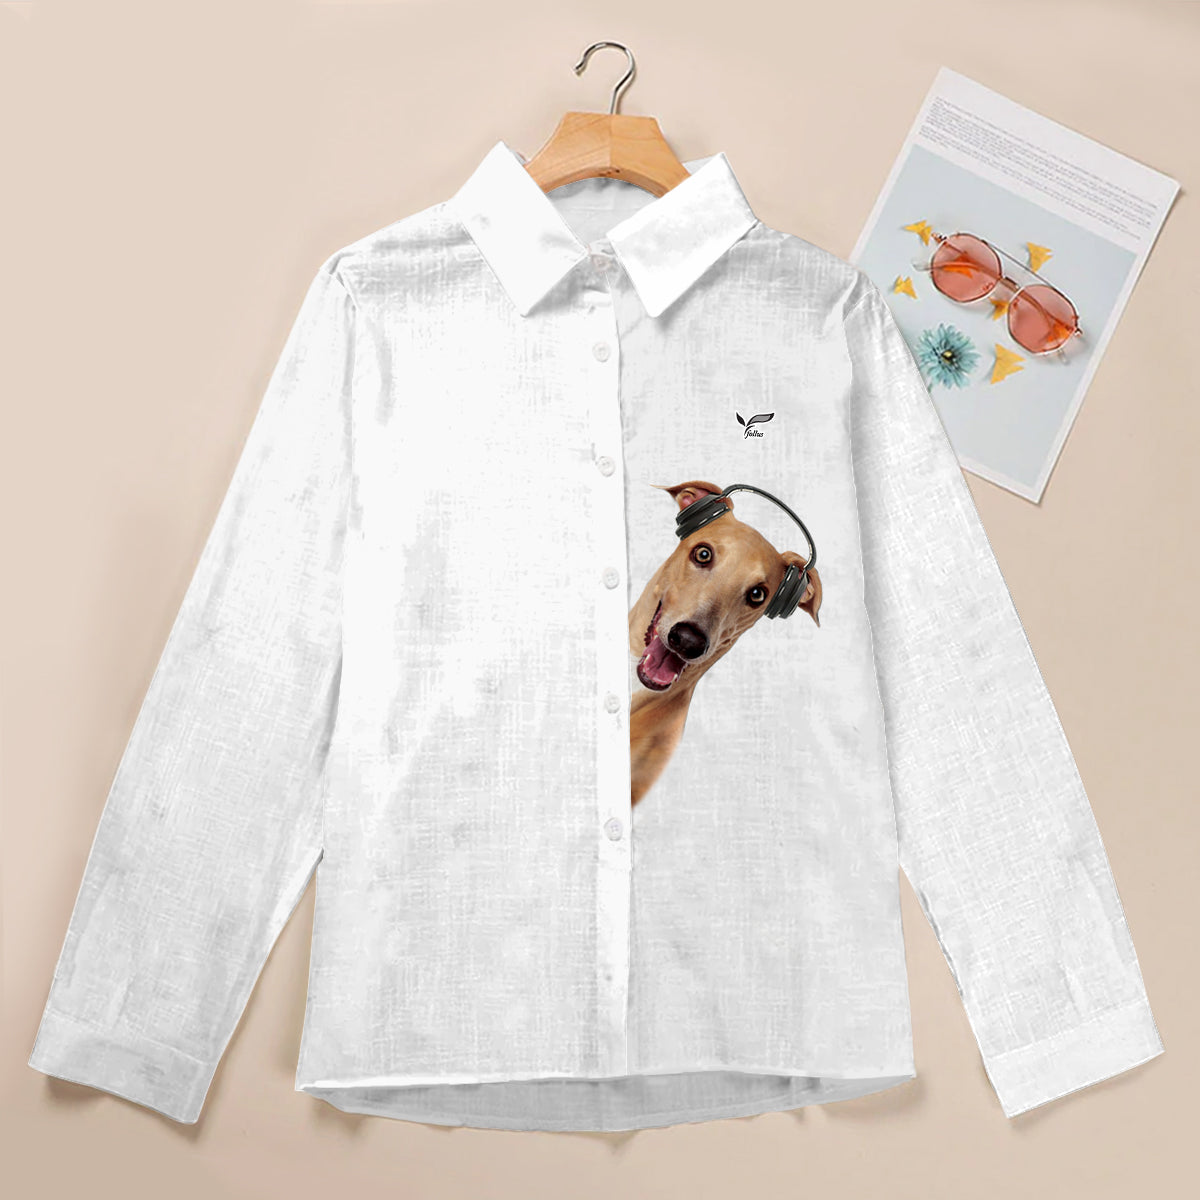 Great Music With Greyhound - Follus Women's Long-Sleeve Shirt V2